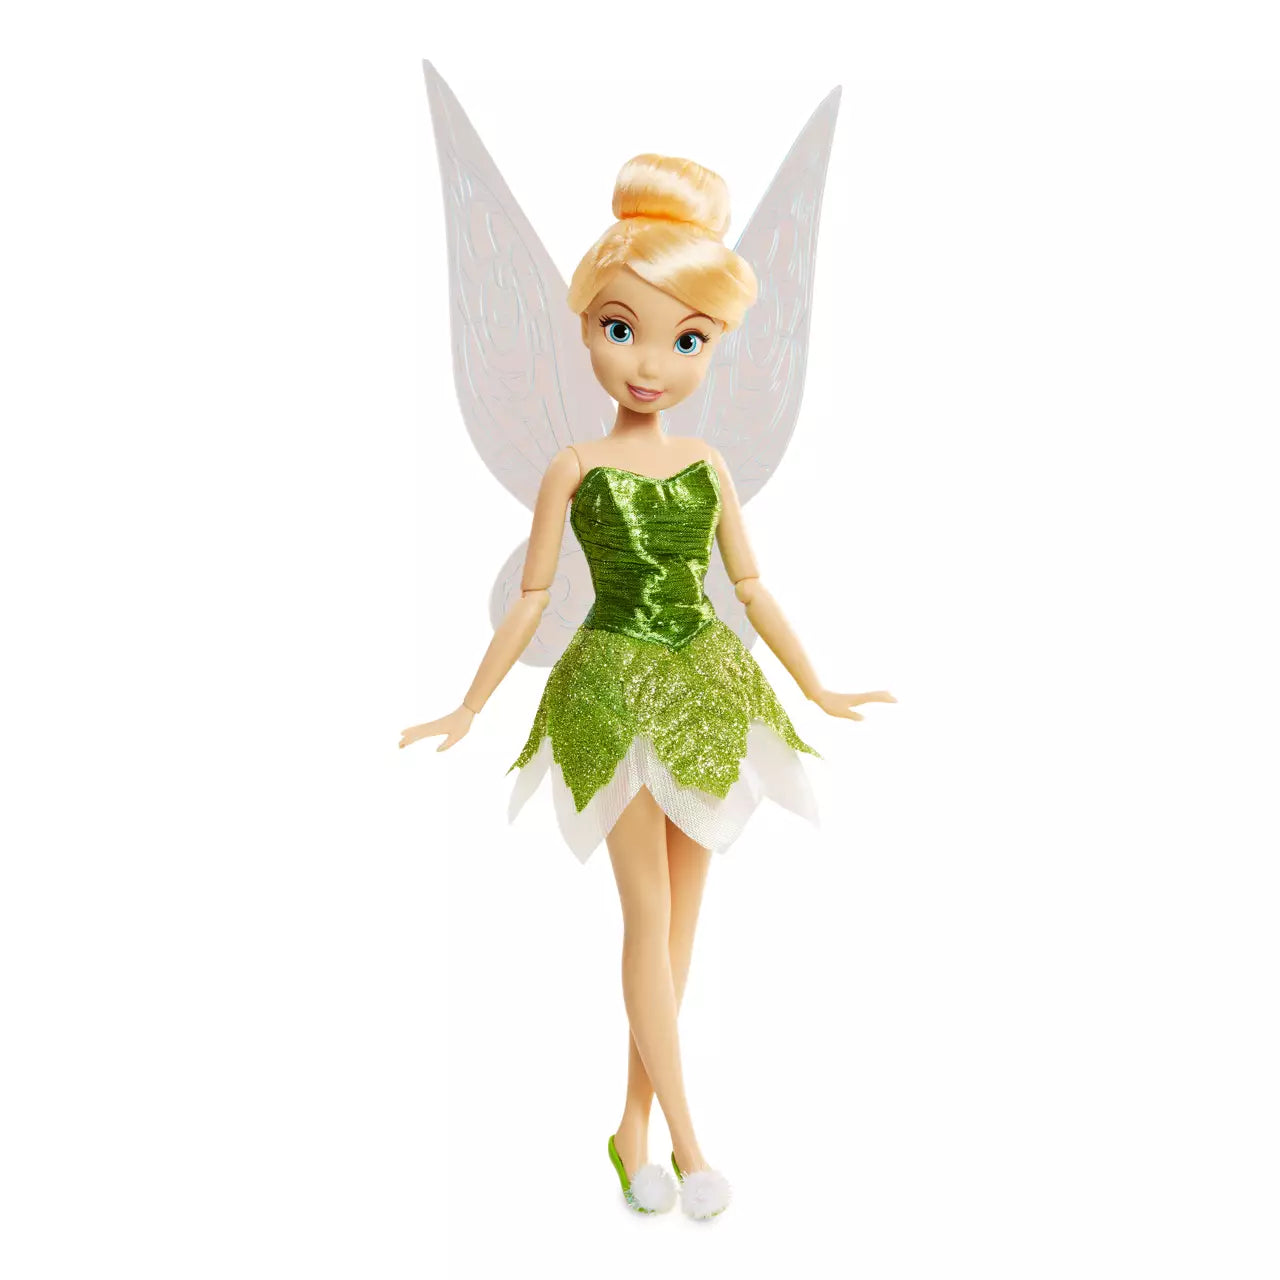 Tinker Bell Classic Doll – Peter Pan